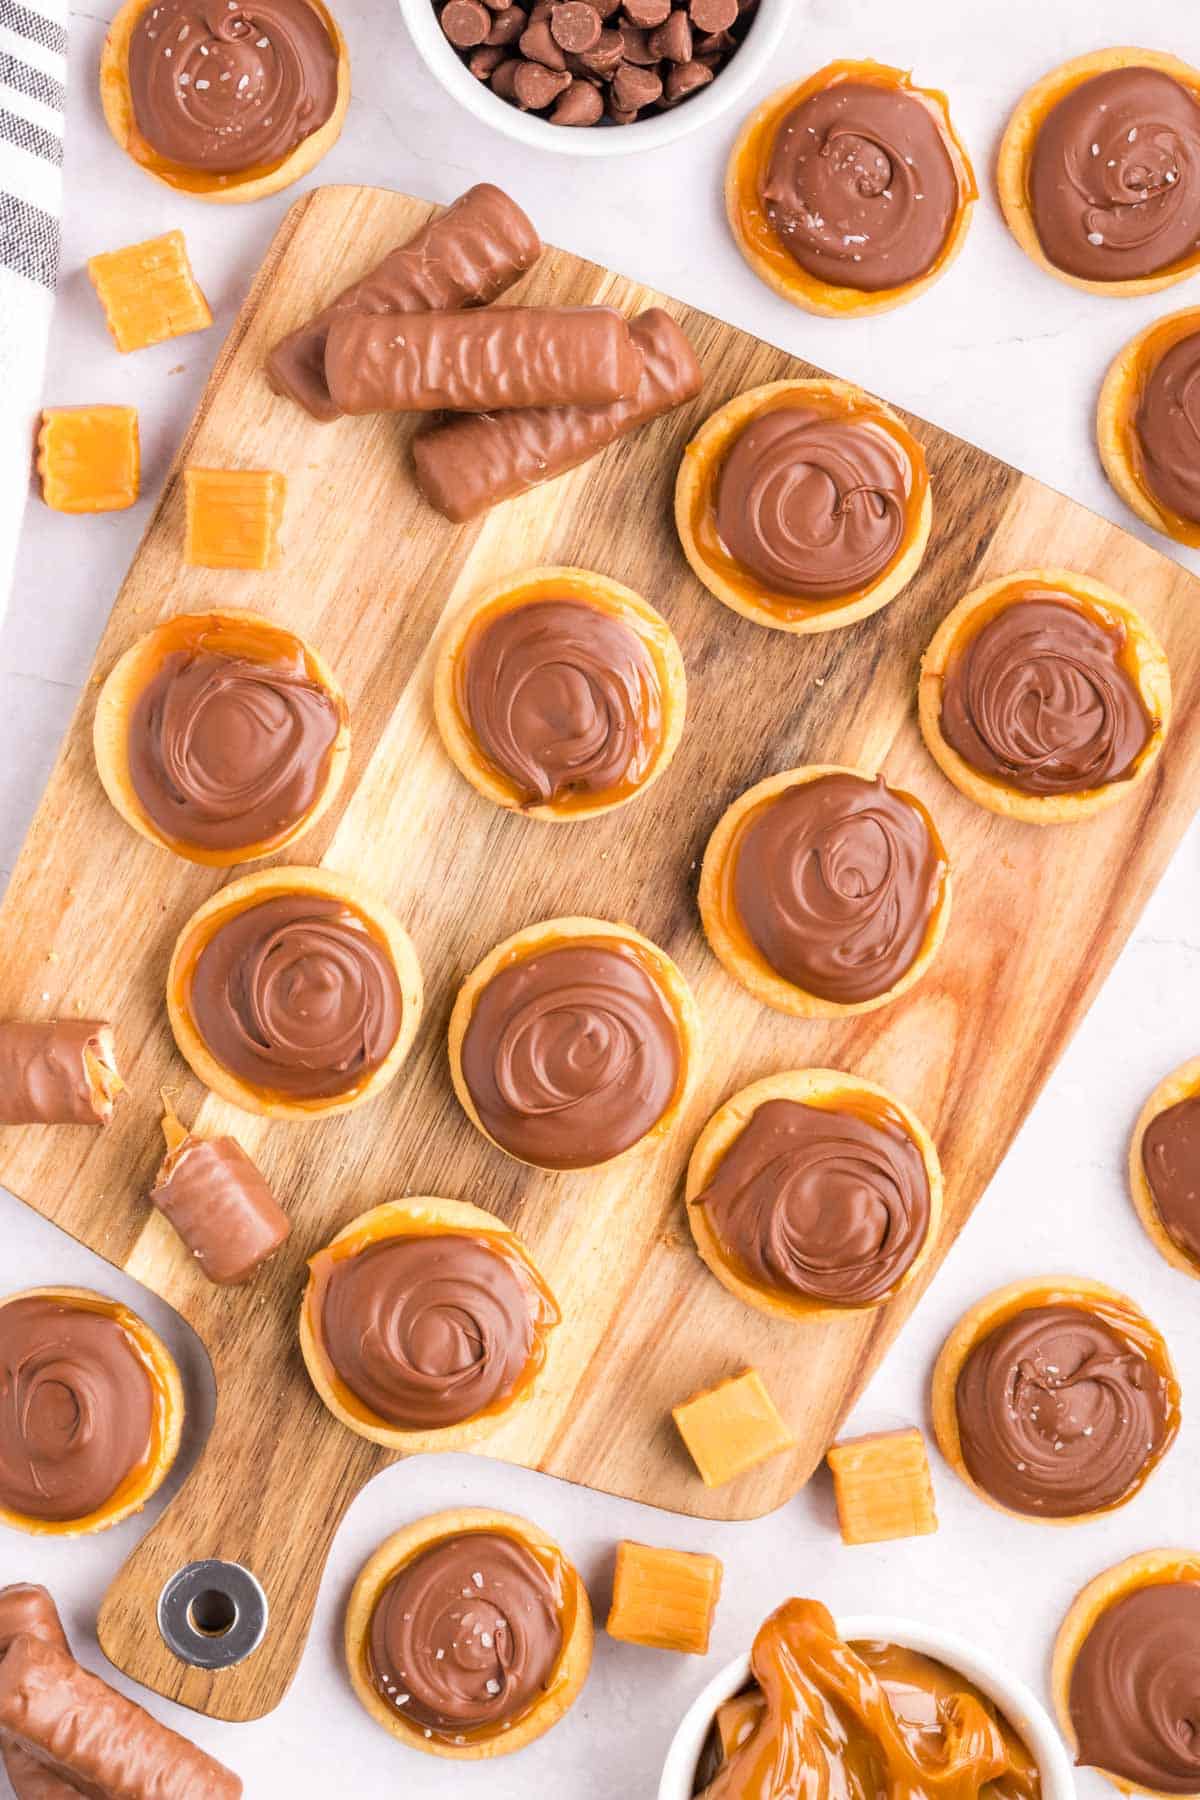 A wooden serving board filled with Twix Cookies and garnished with Twix candy bars and caramel squares.